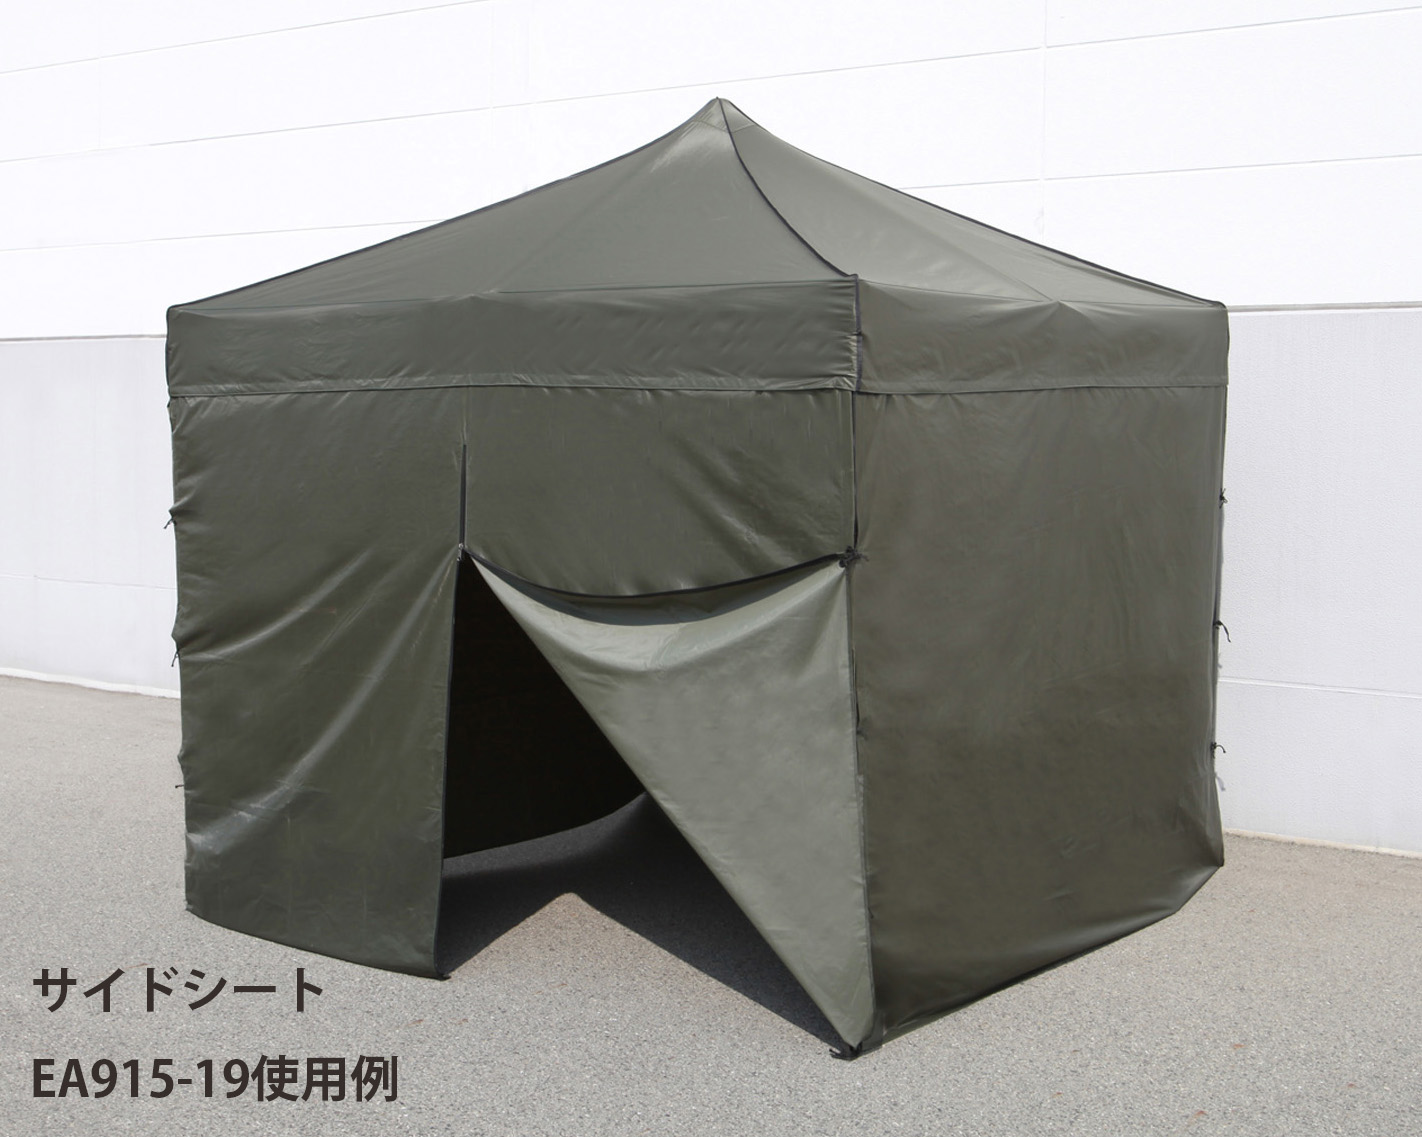 EA915-18A｜3.0x 3.0m 四脚テント(OD色/張ﾛｰﾌﾟ冠付)のページ